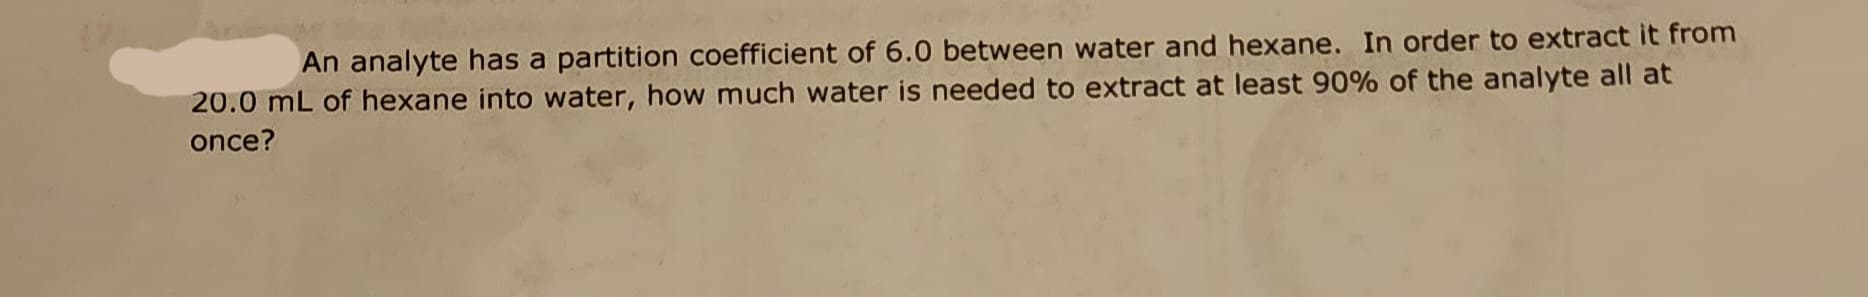 An analyte has a partition coefficient of 6.0 between water and hexane. In order to extract it from
20.0 mL of hexane into water, how much water is needed to extract at least 90% of the analyte all at
once?